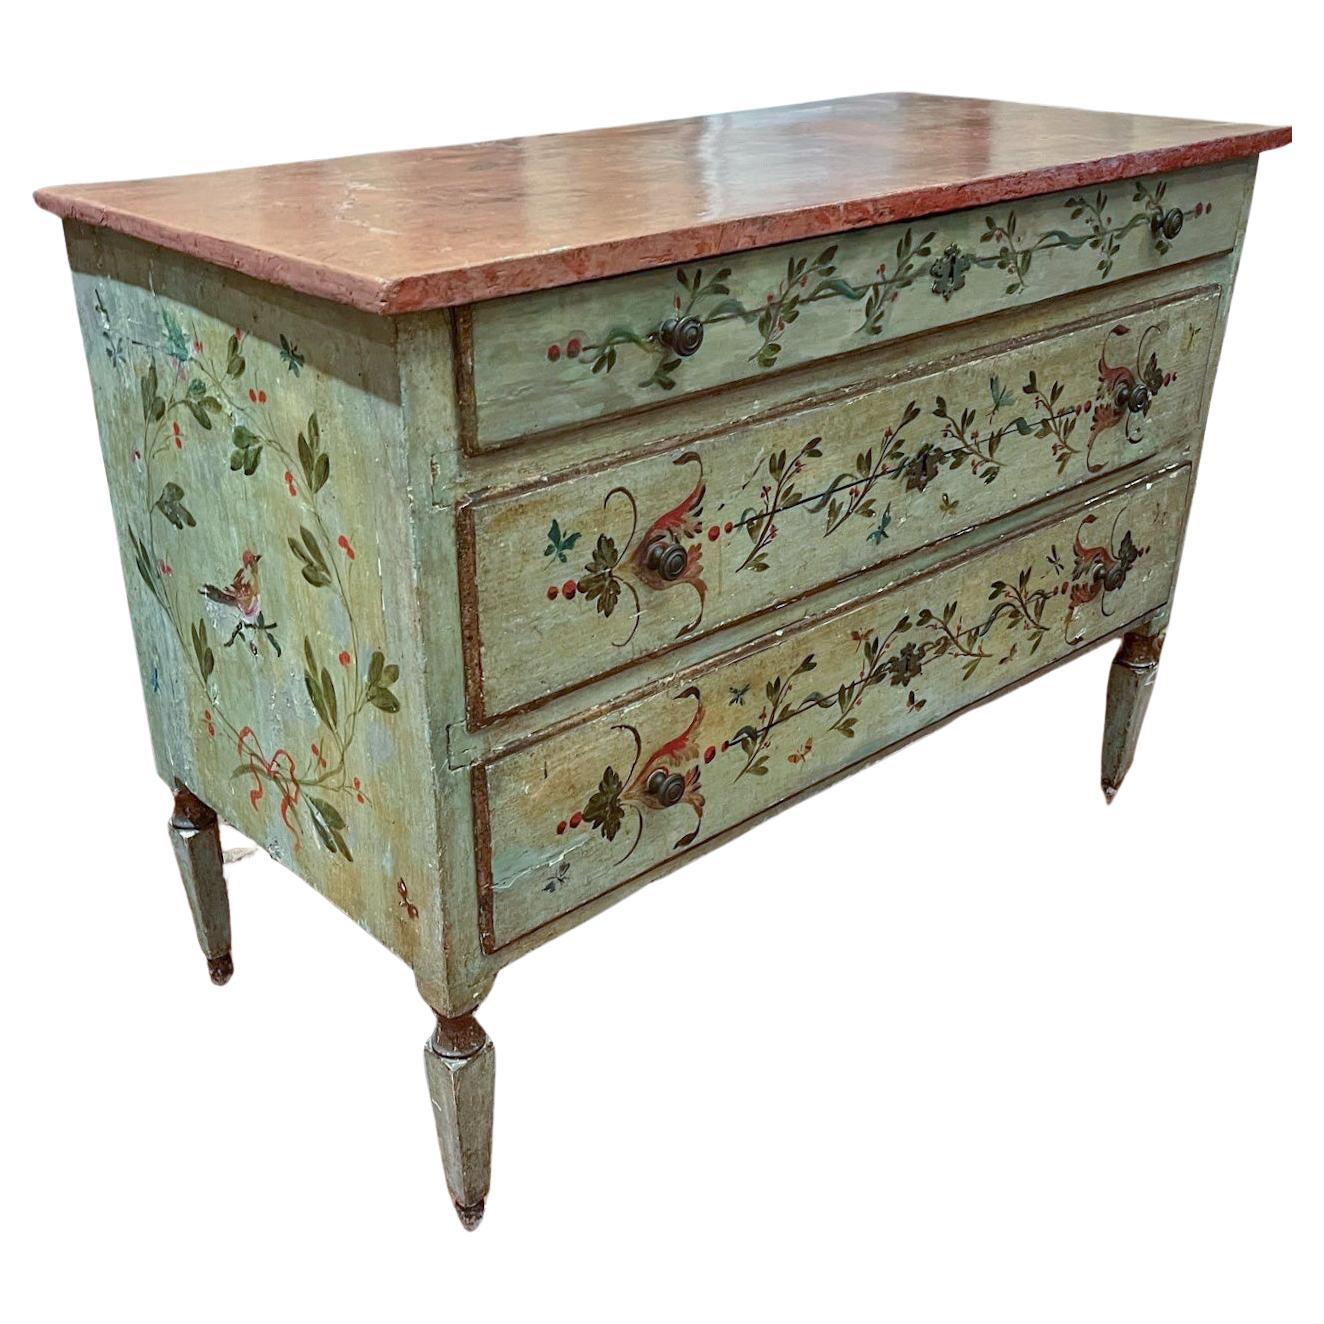 18th Century Polychrome Painted Faux Marble Top Neoclassical Chest of Drawers.